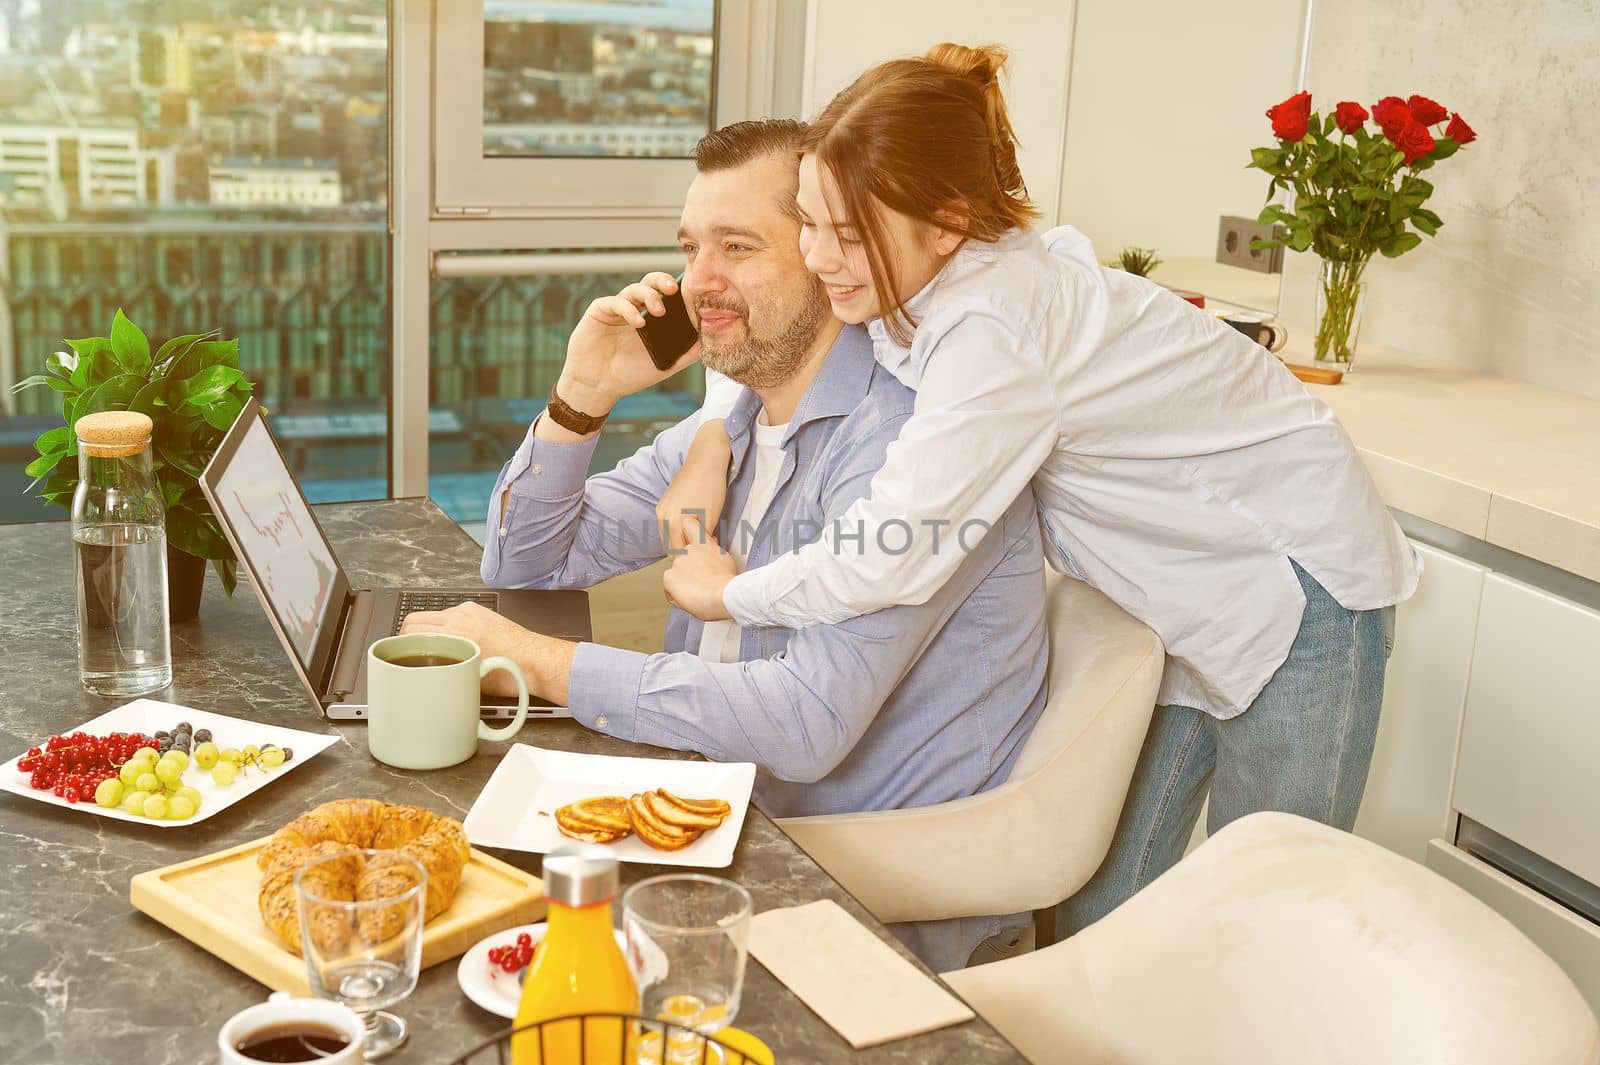 Happy father and daughter having breakfast in kitchen and using digital devices. Lifestyle, Morning breakfast, father and daughter together.